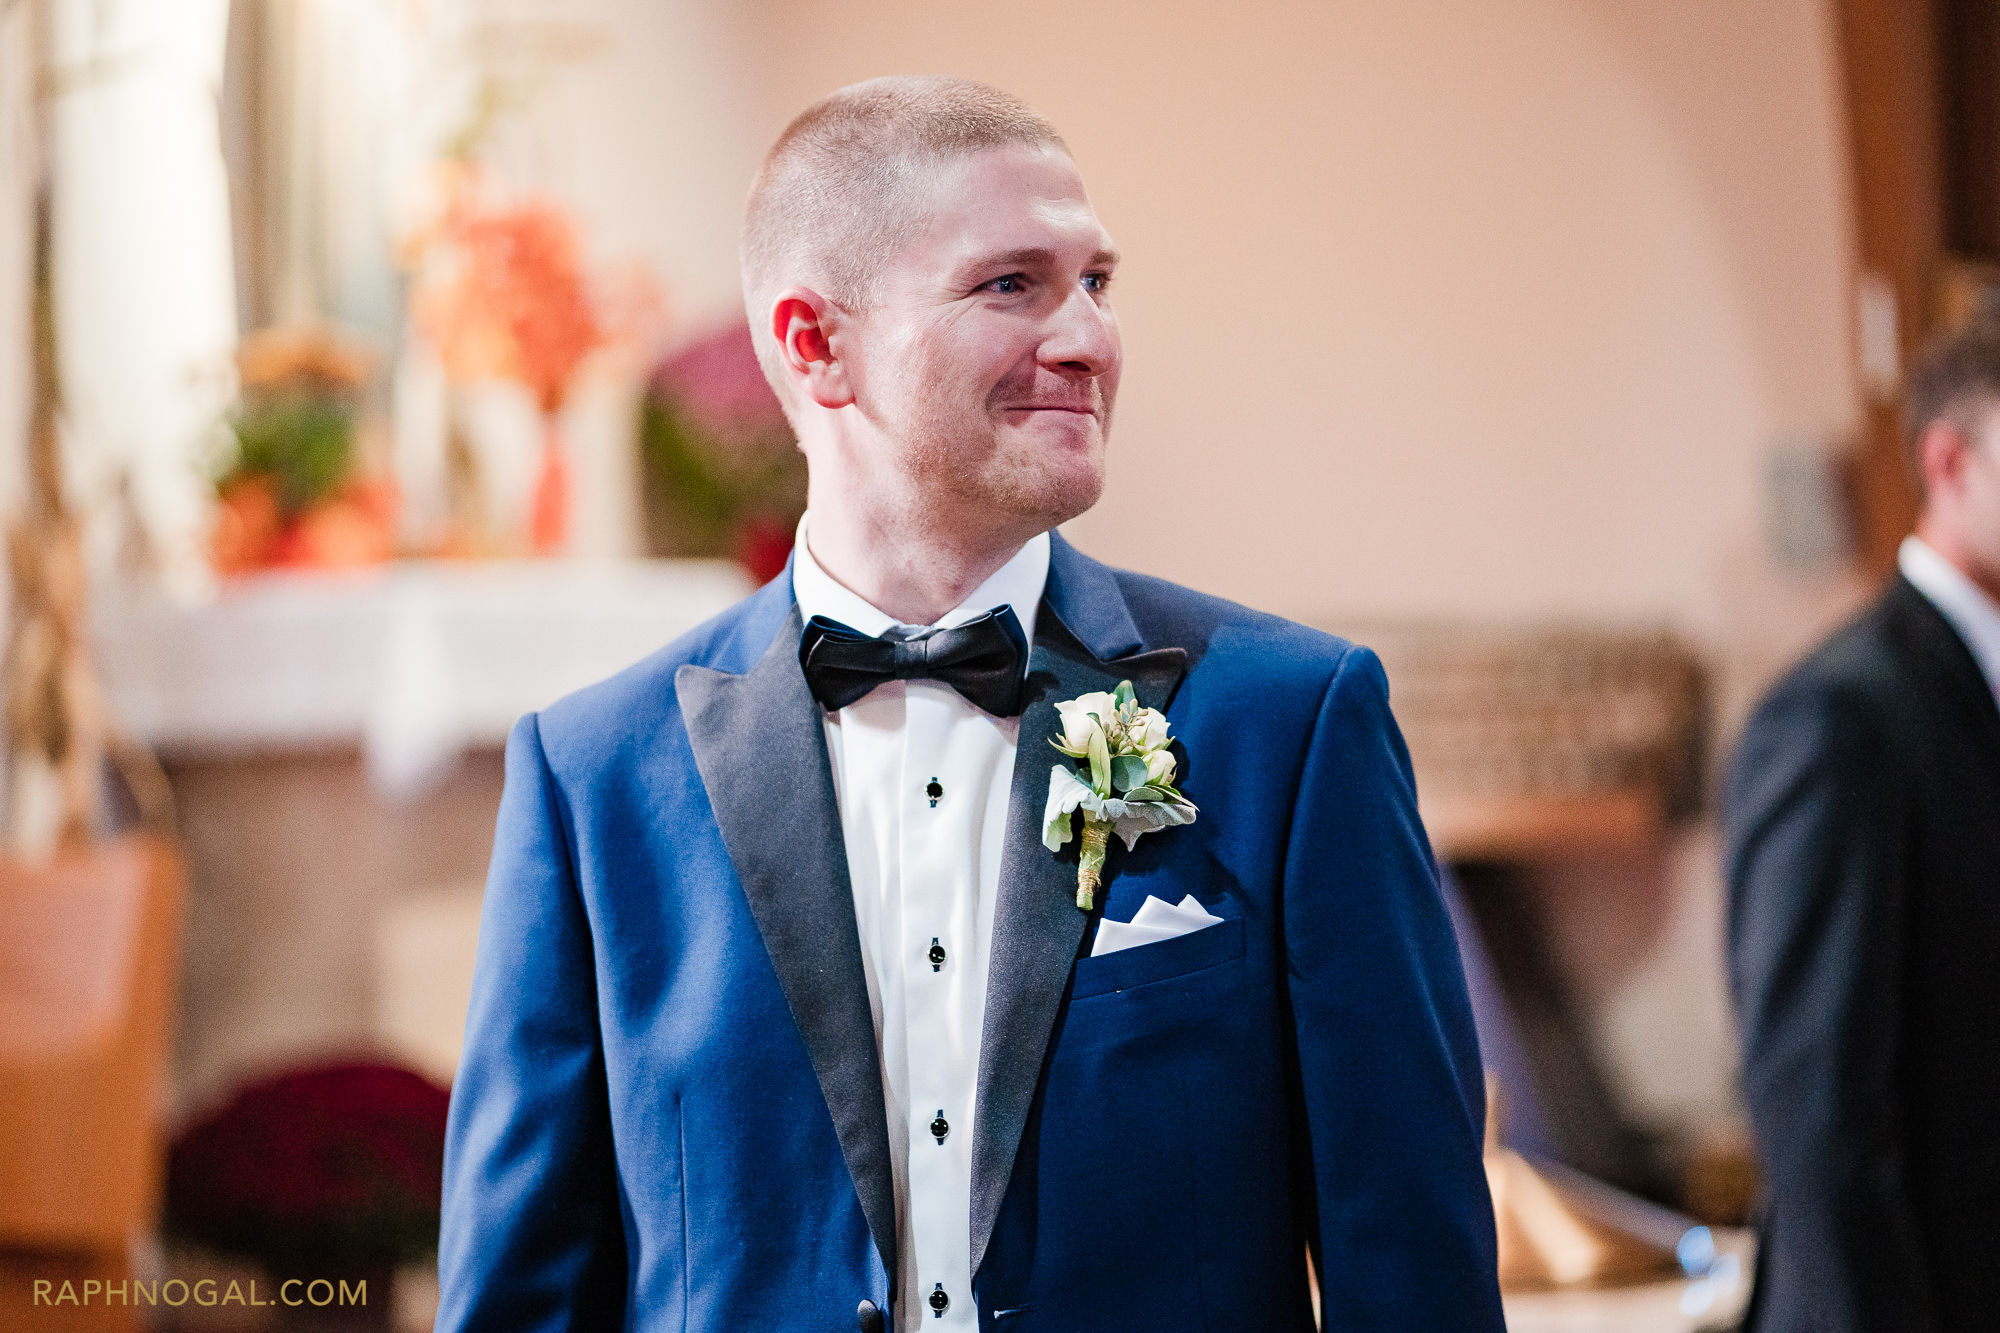 Groom seeing bride for the first time